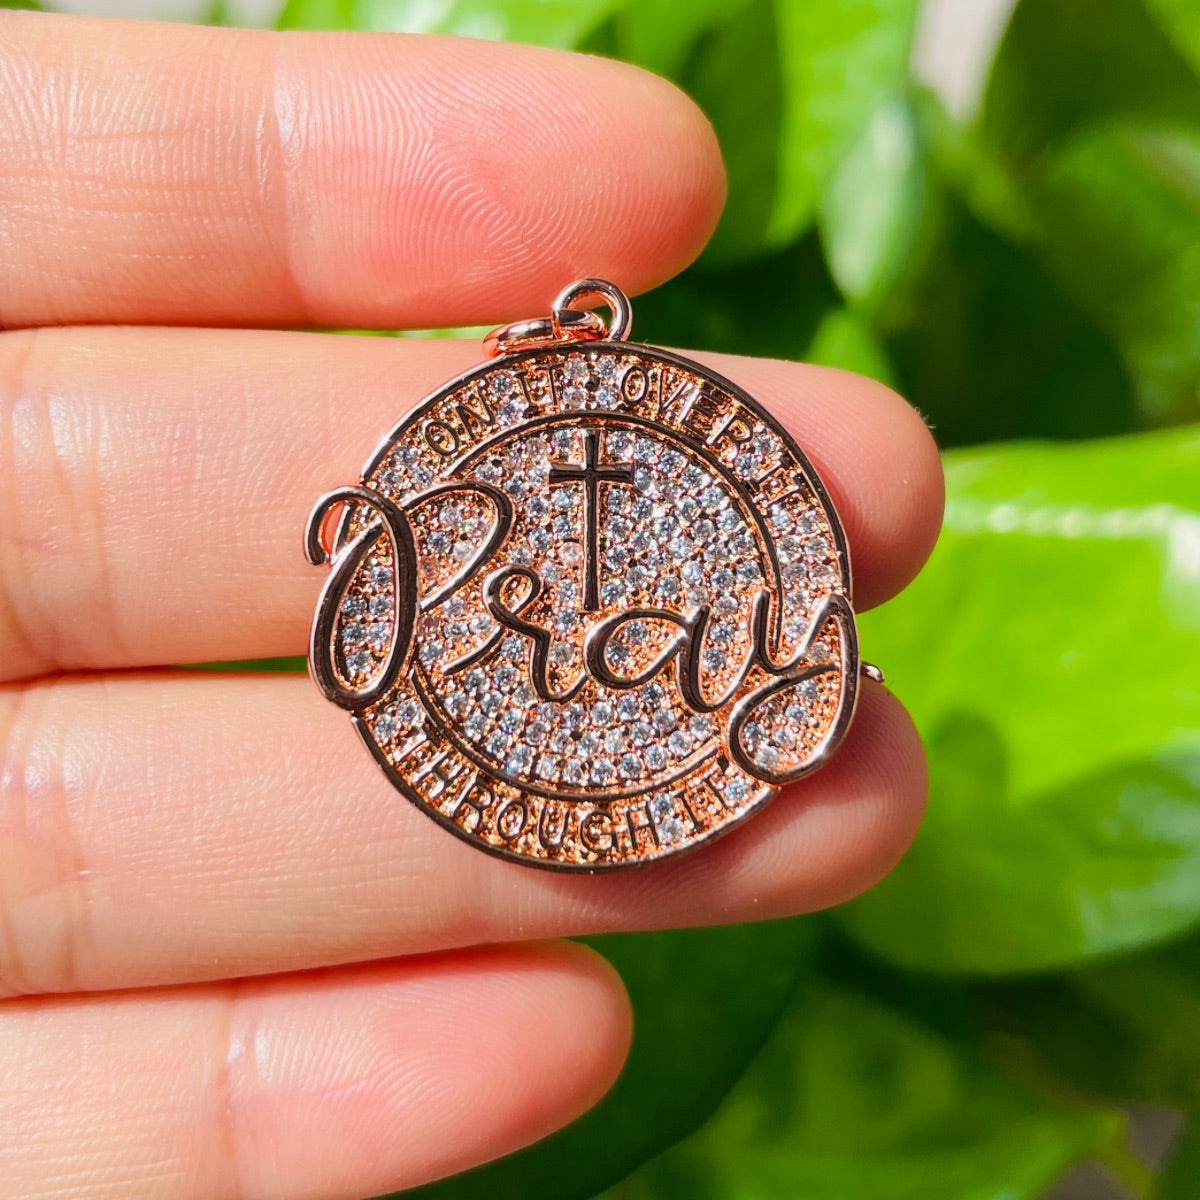 10pcs/lot 28mm CZ Pave Round Plate PRAY ON IT OVER IT THROUGH IT Quote Charms Rose Gold CZ Paved Charms Christian Quotes Discs On Sale Charms Beads Beyond